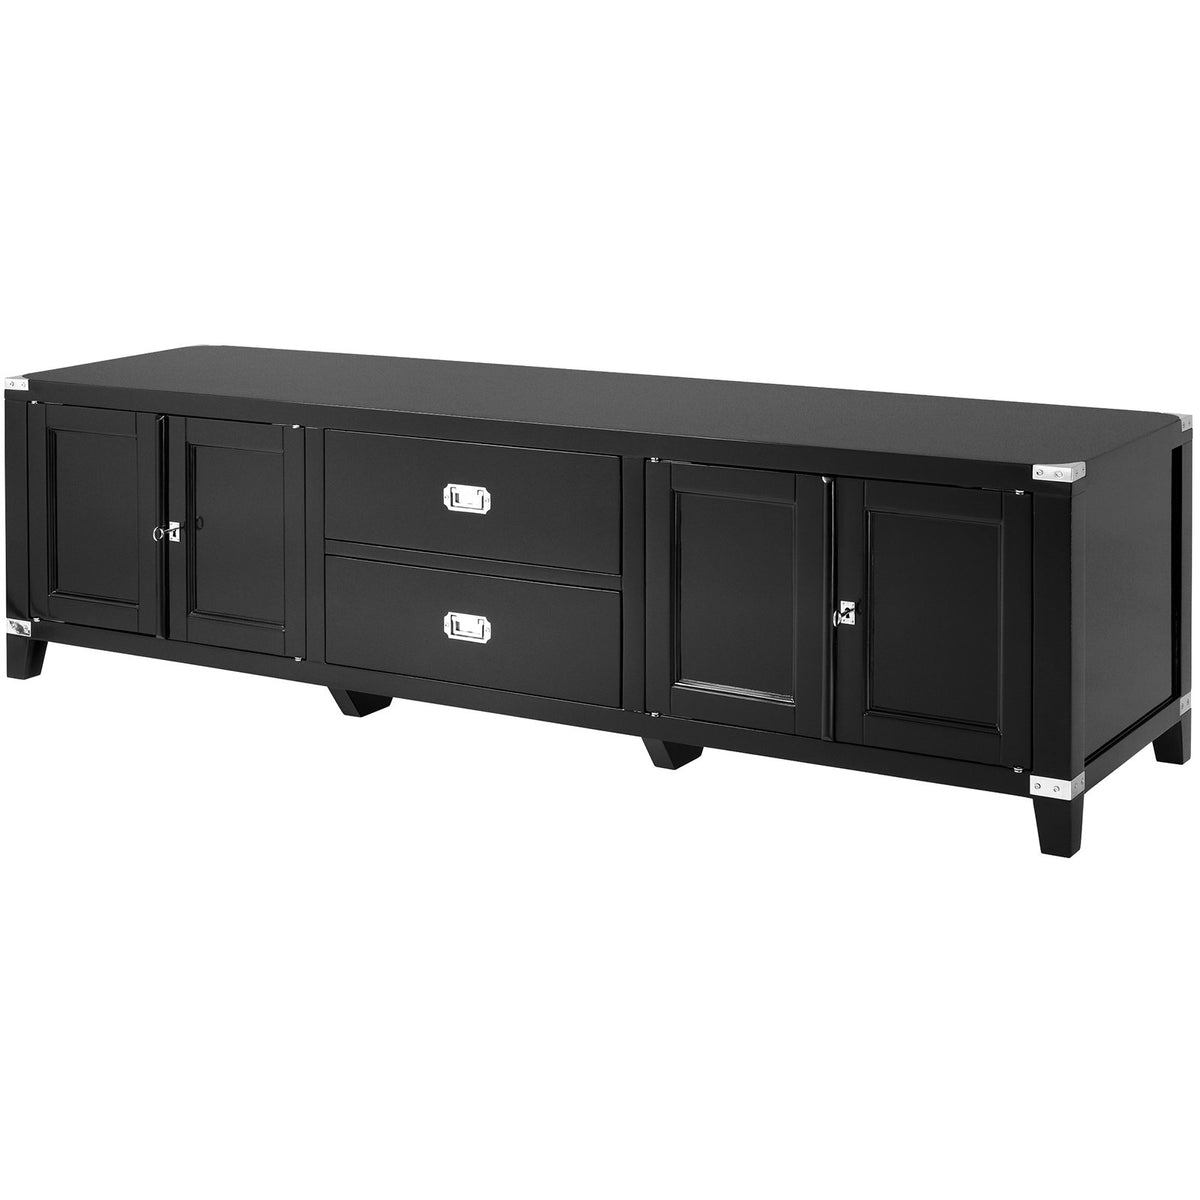 Military TV Cabinet